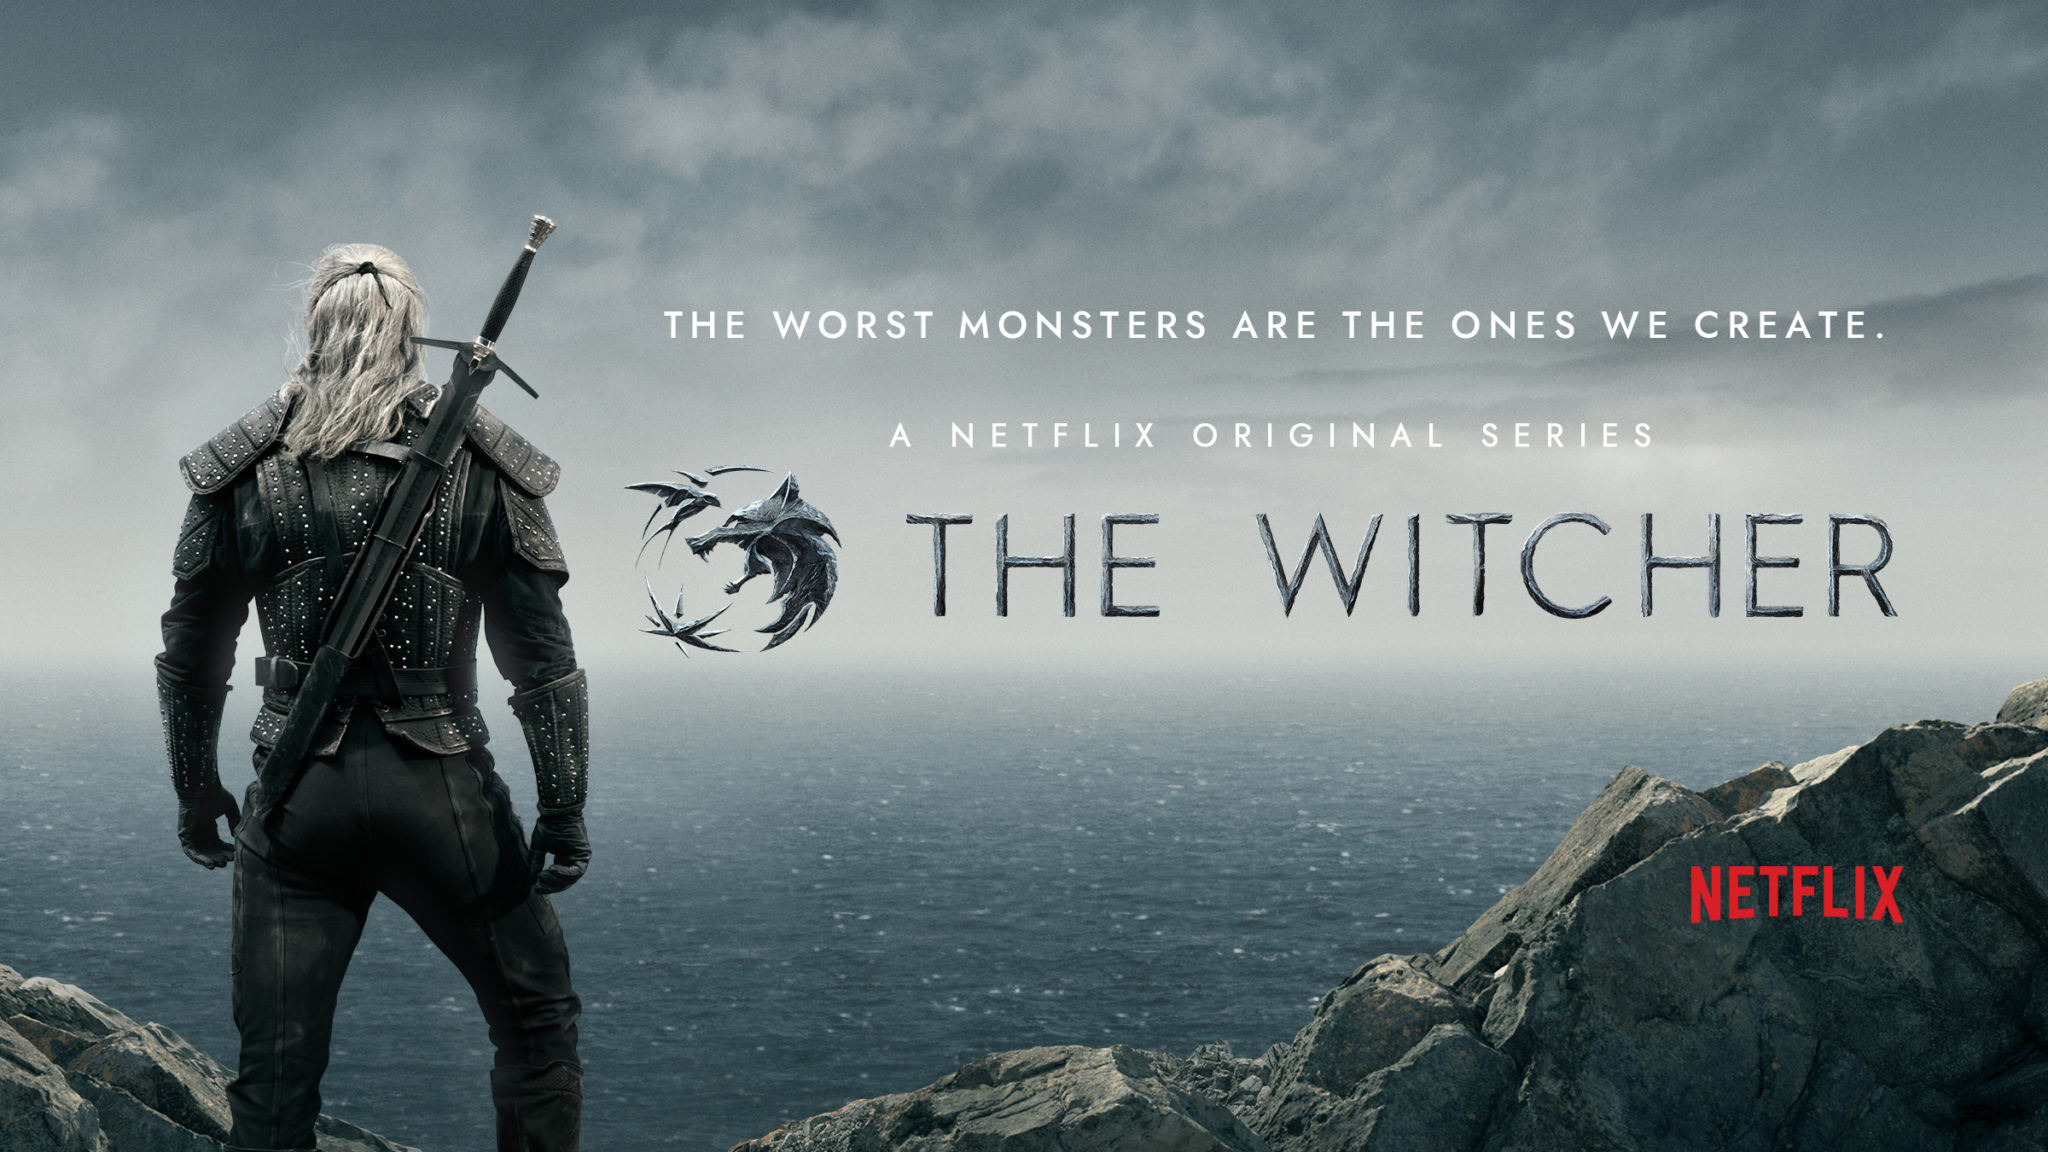 The Official Trailer for Season 2 of "The Witcher" Drops and It's Amazing